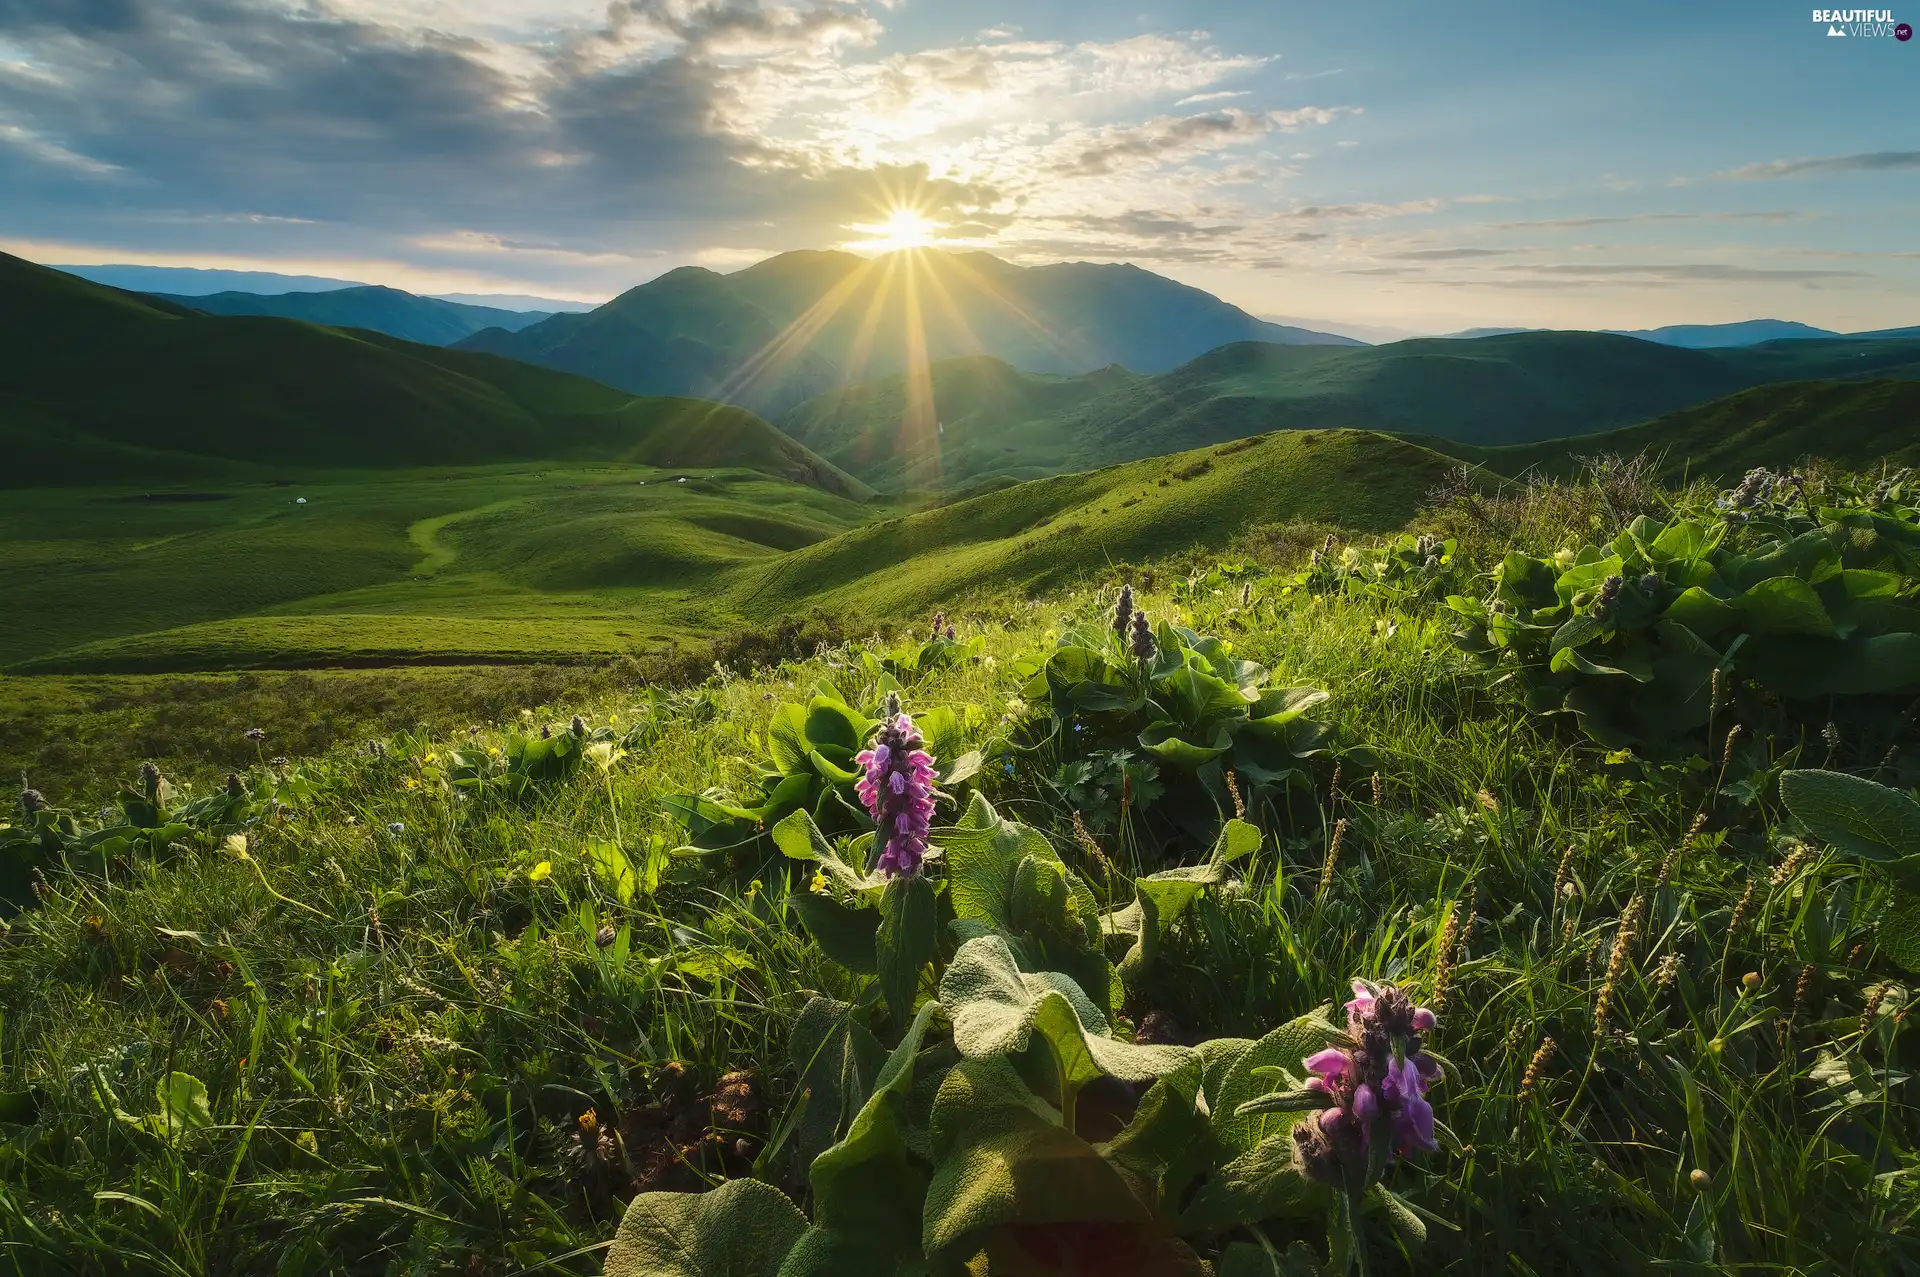 Meadow, Flowers, The Hills, rays of the Sun, Mountains, Plants